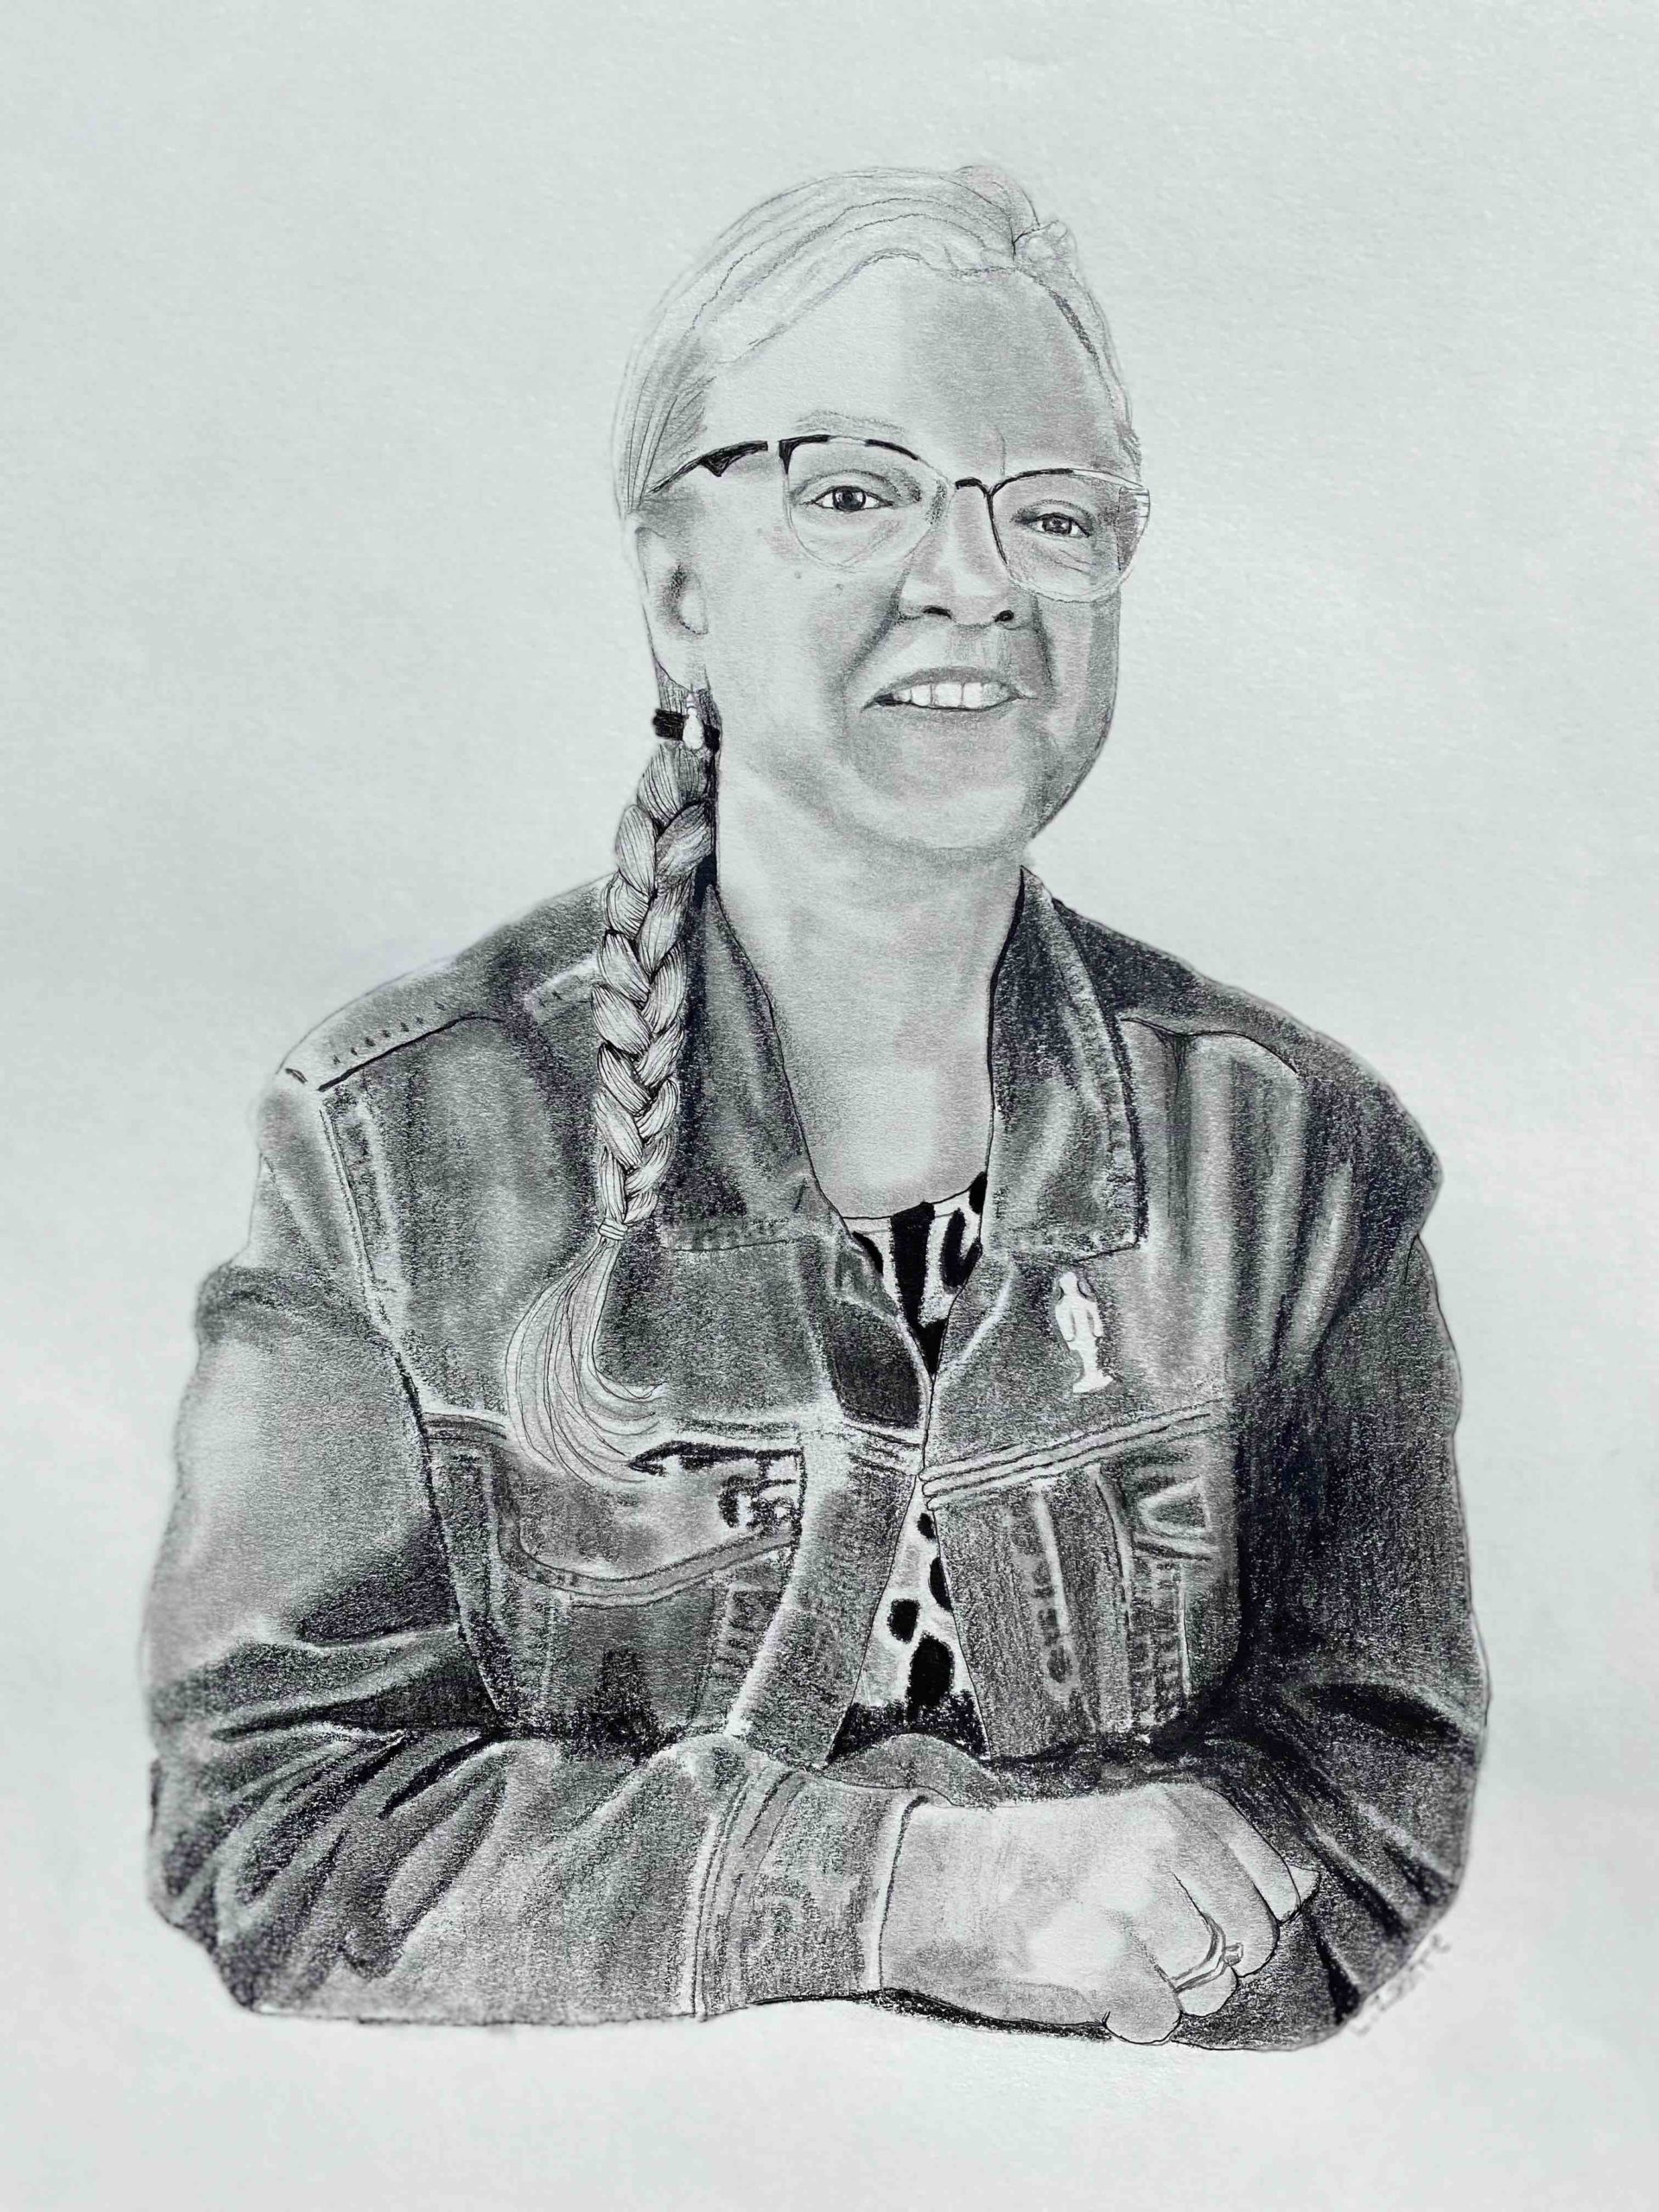 This is a drawing of a woman. She is wearing a jean jacket and glasses. Her hair, in a long white braid, falls over her shoulder. She is smiling.